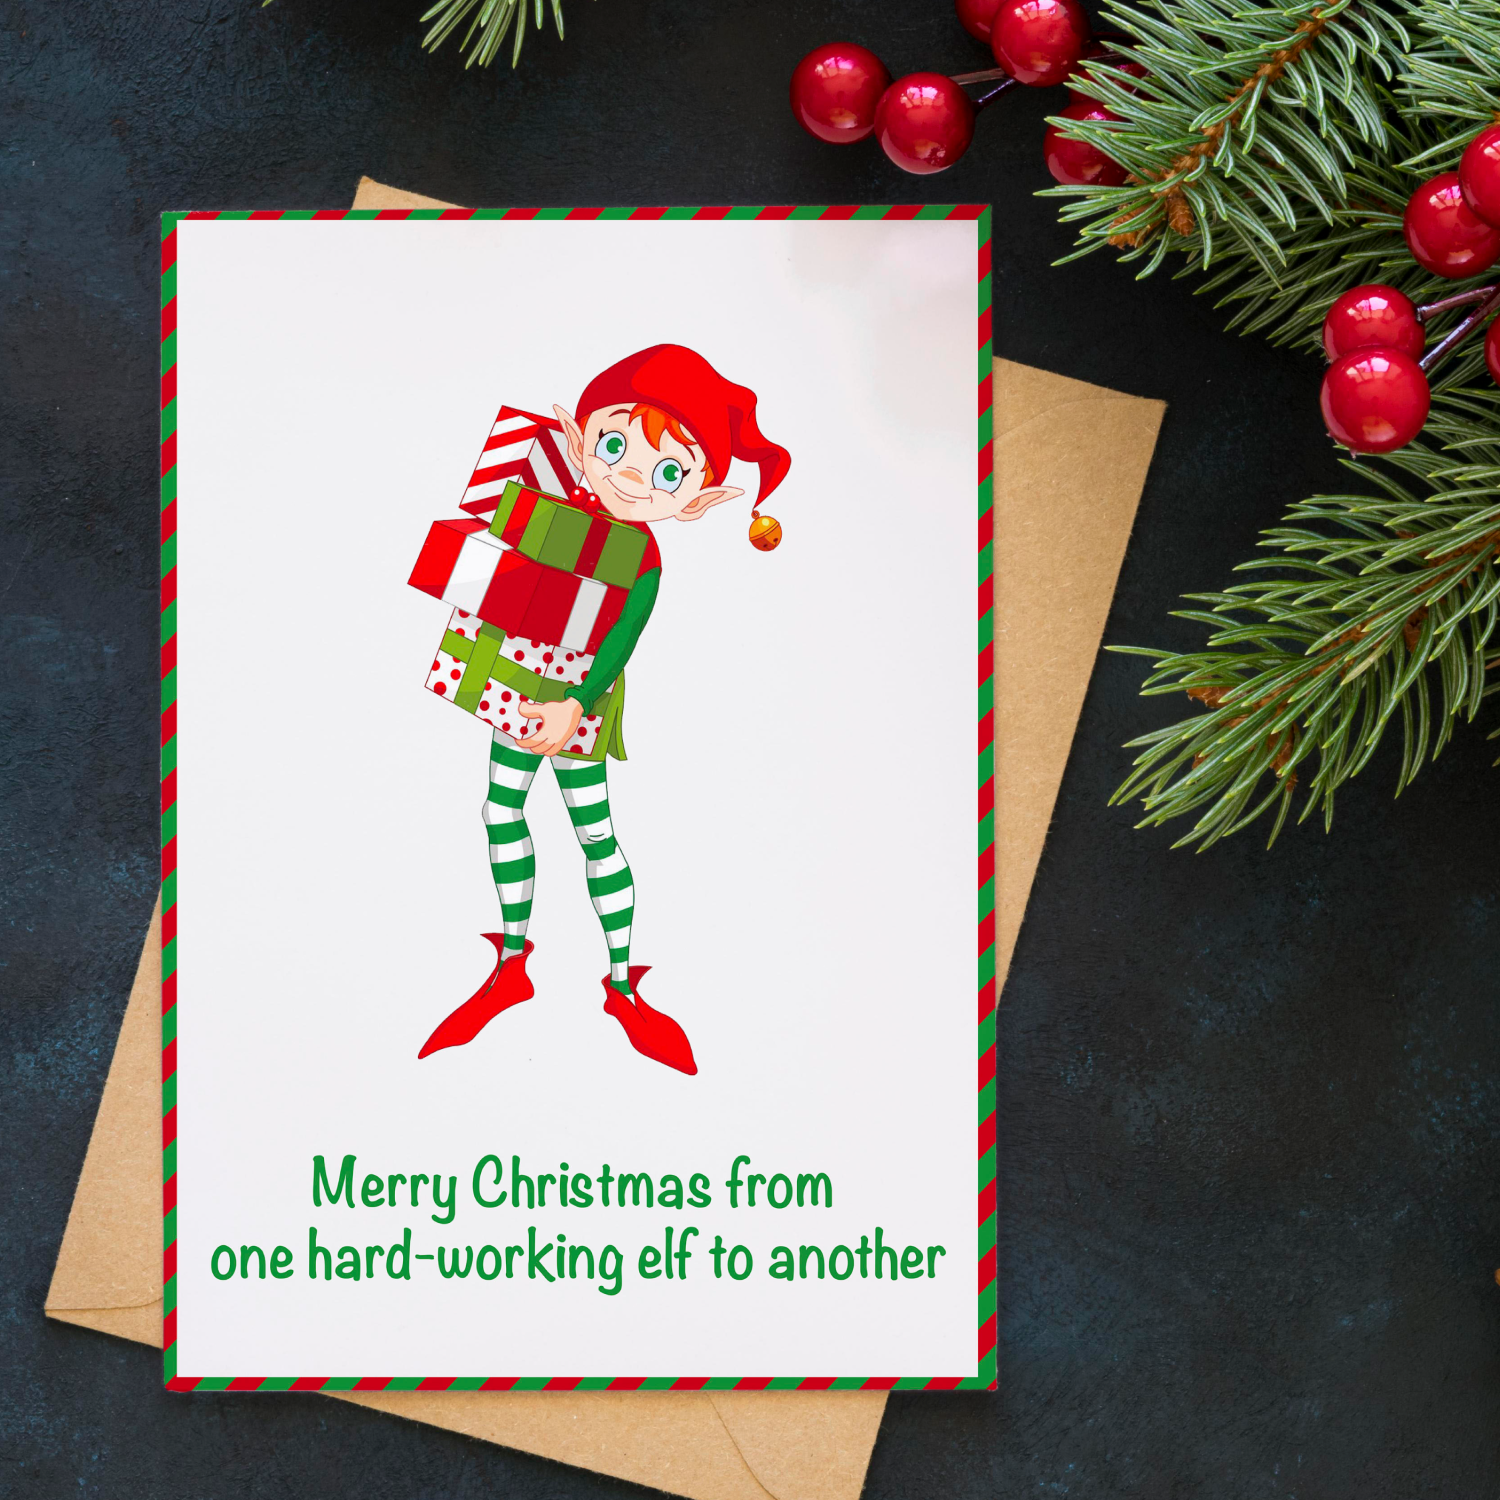 Free Christmas Card with Elf cover image.